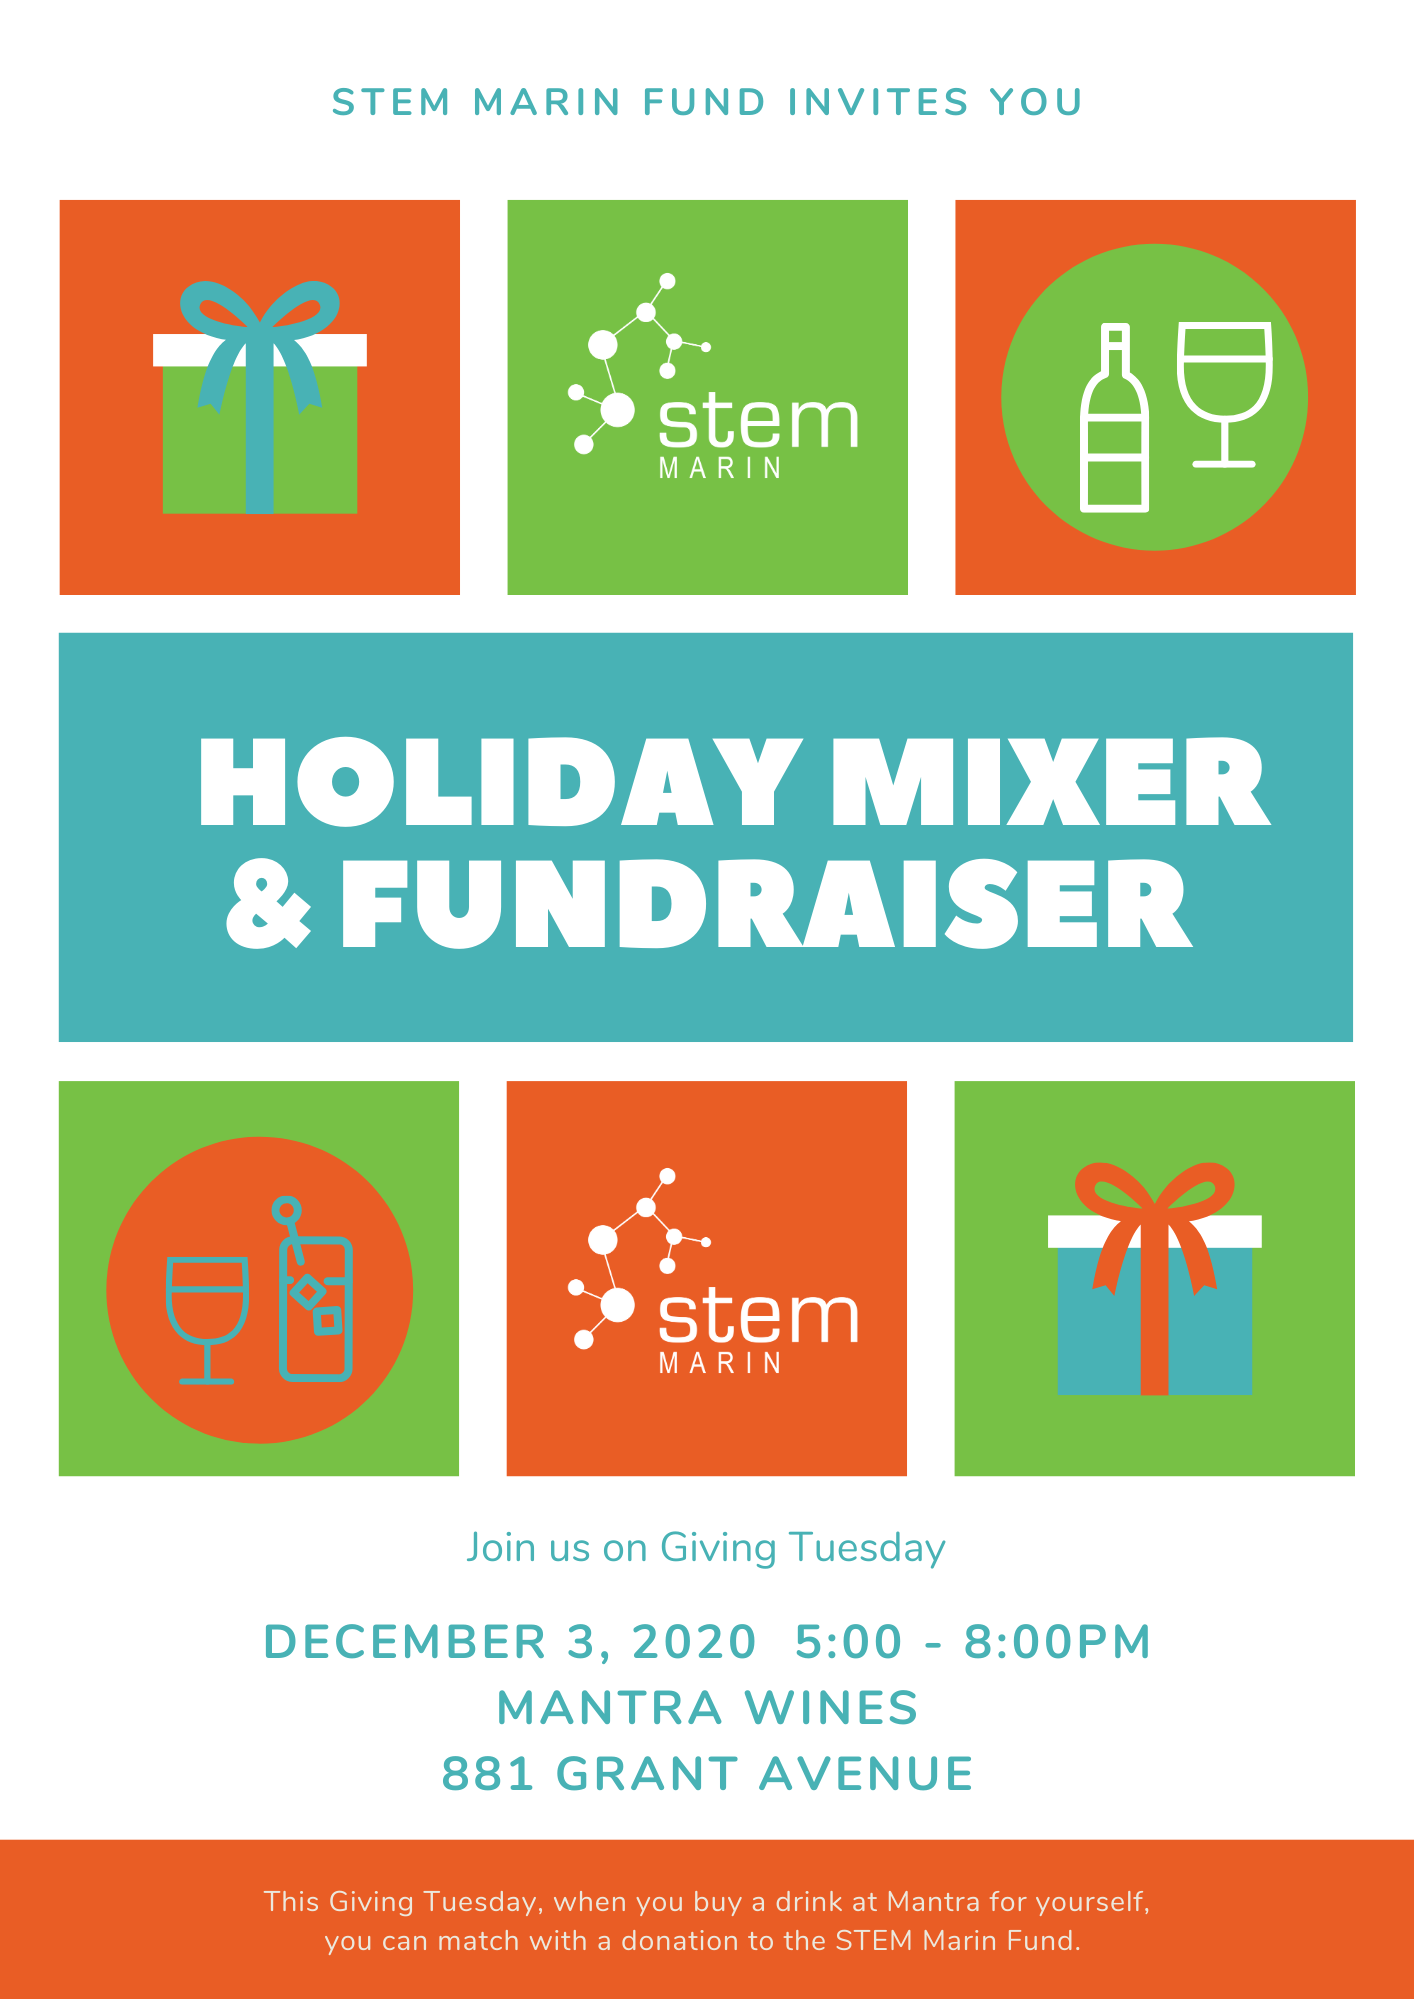 Flyer for the Holiday Mixer and Fundraiser